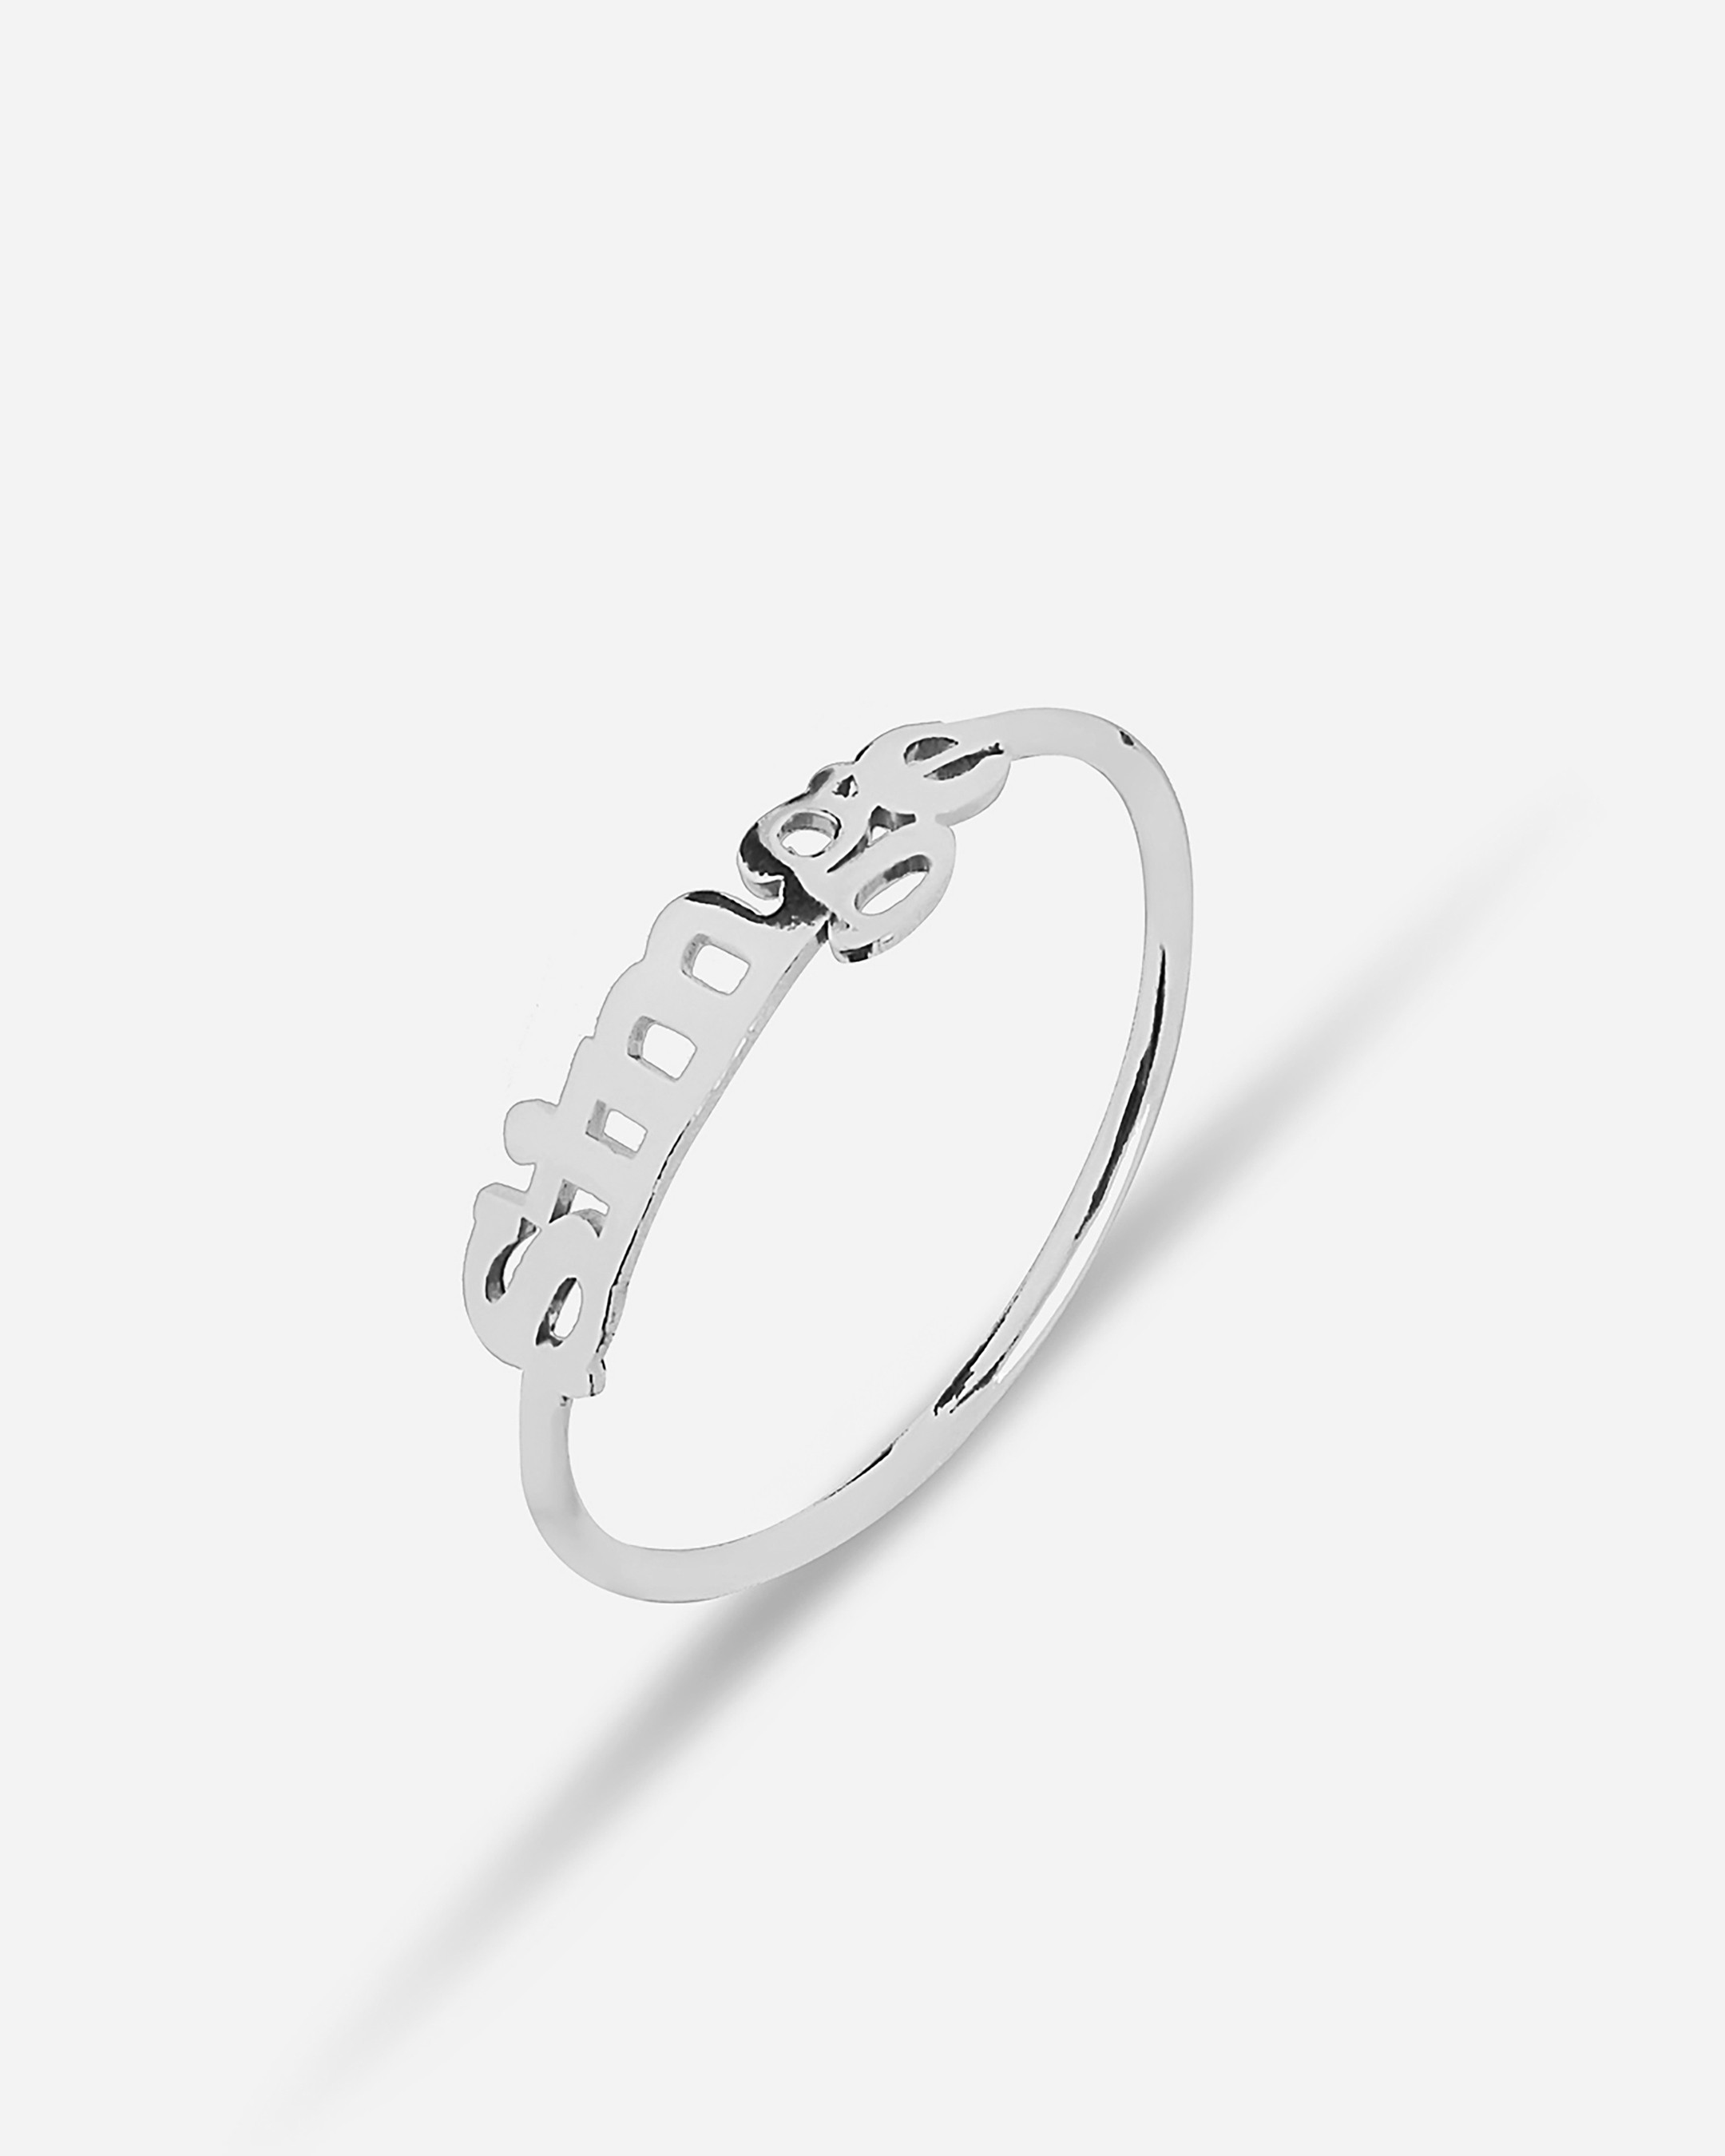 Named Silver Ring - White Gold